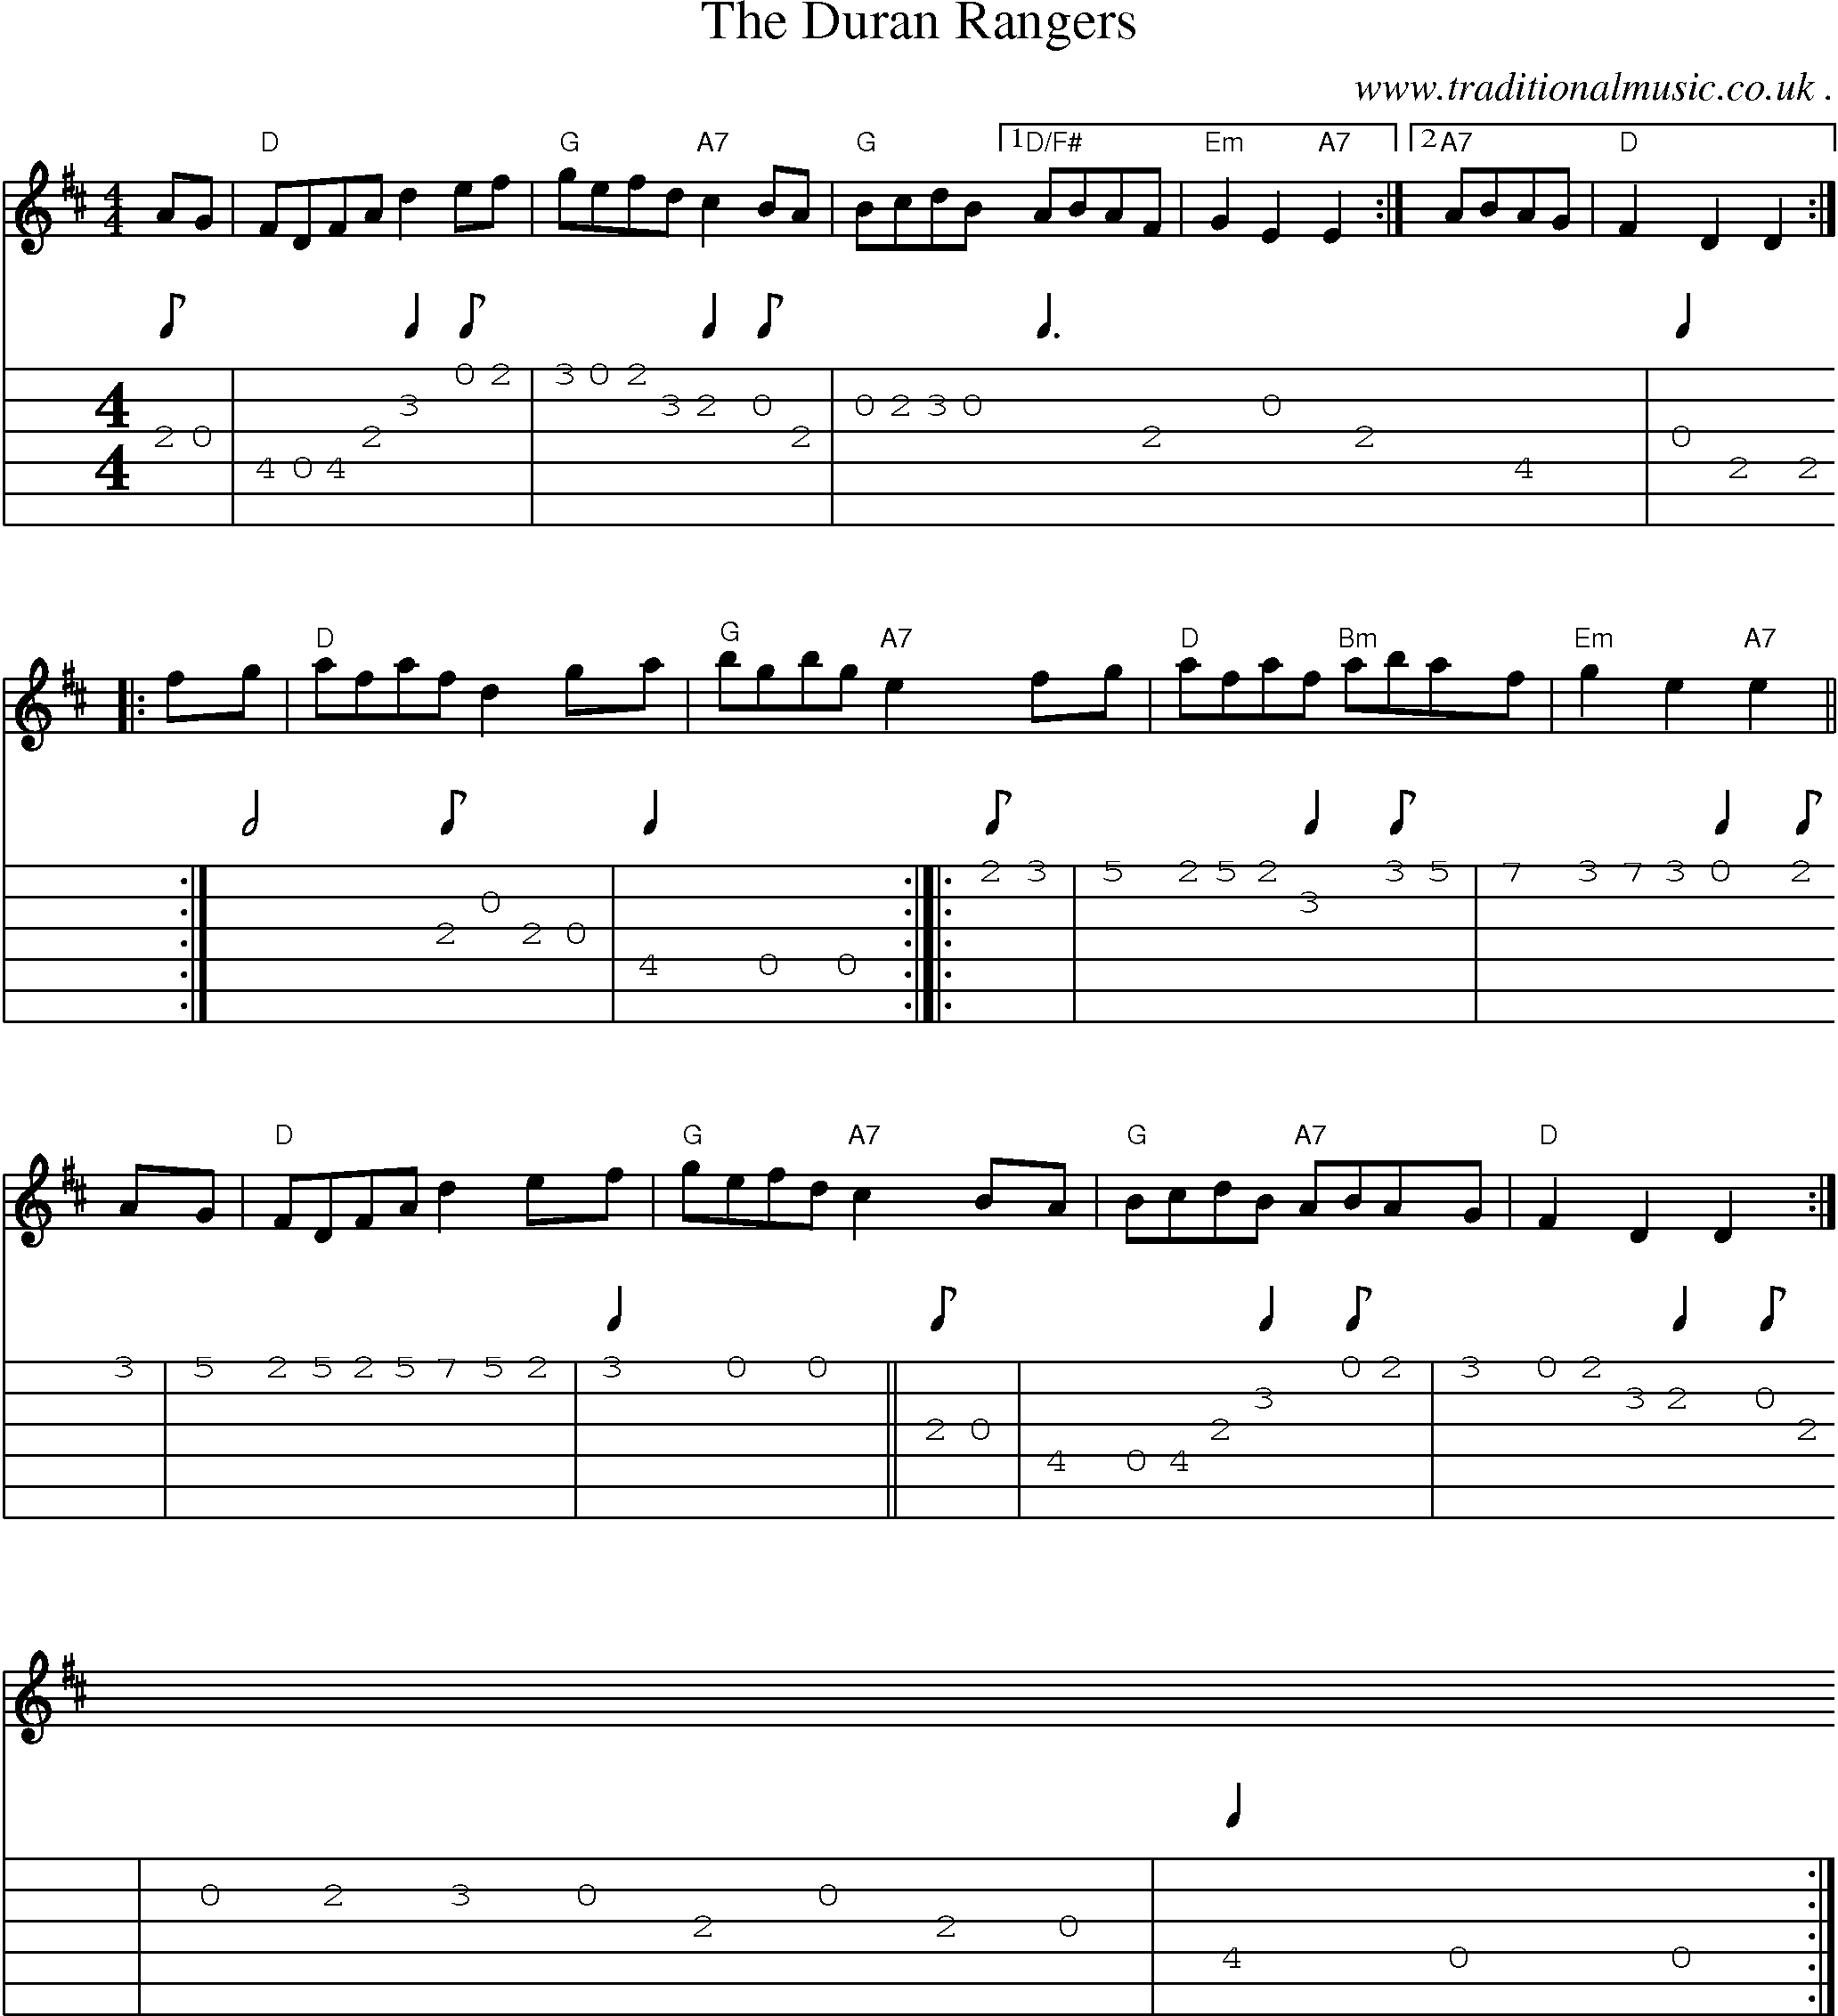 Sheet-music  score, Chords and Guitar Tabs for The Duran Rangers